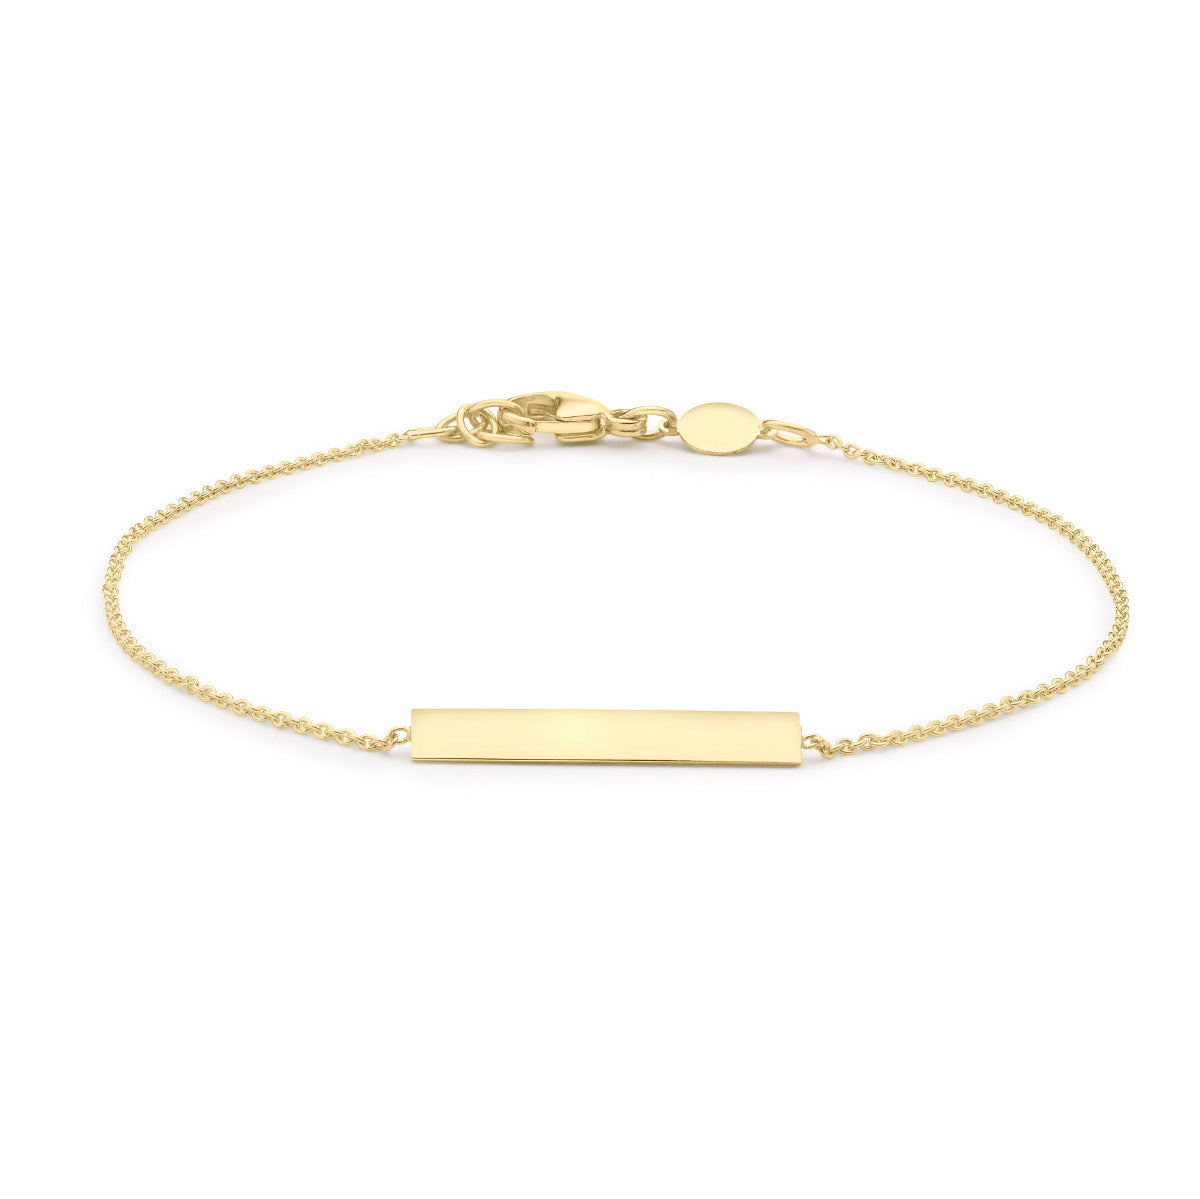 9ct Yellow Gold Delicate Trace Chain With ID Plate Bracelet